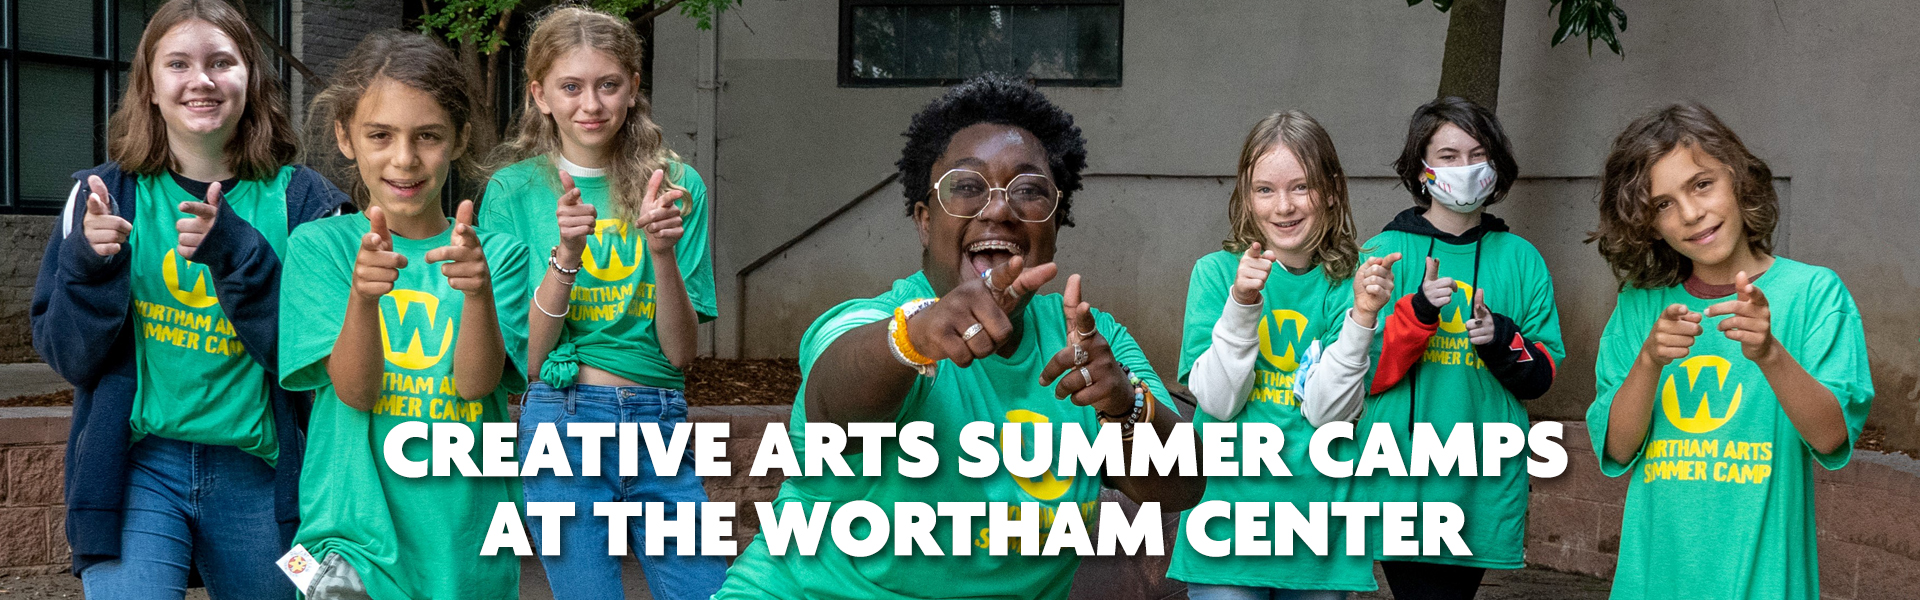 Creative Arts Summer Camps at the Wortham Center